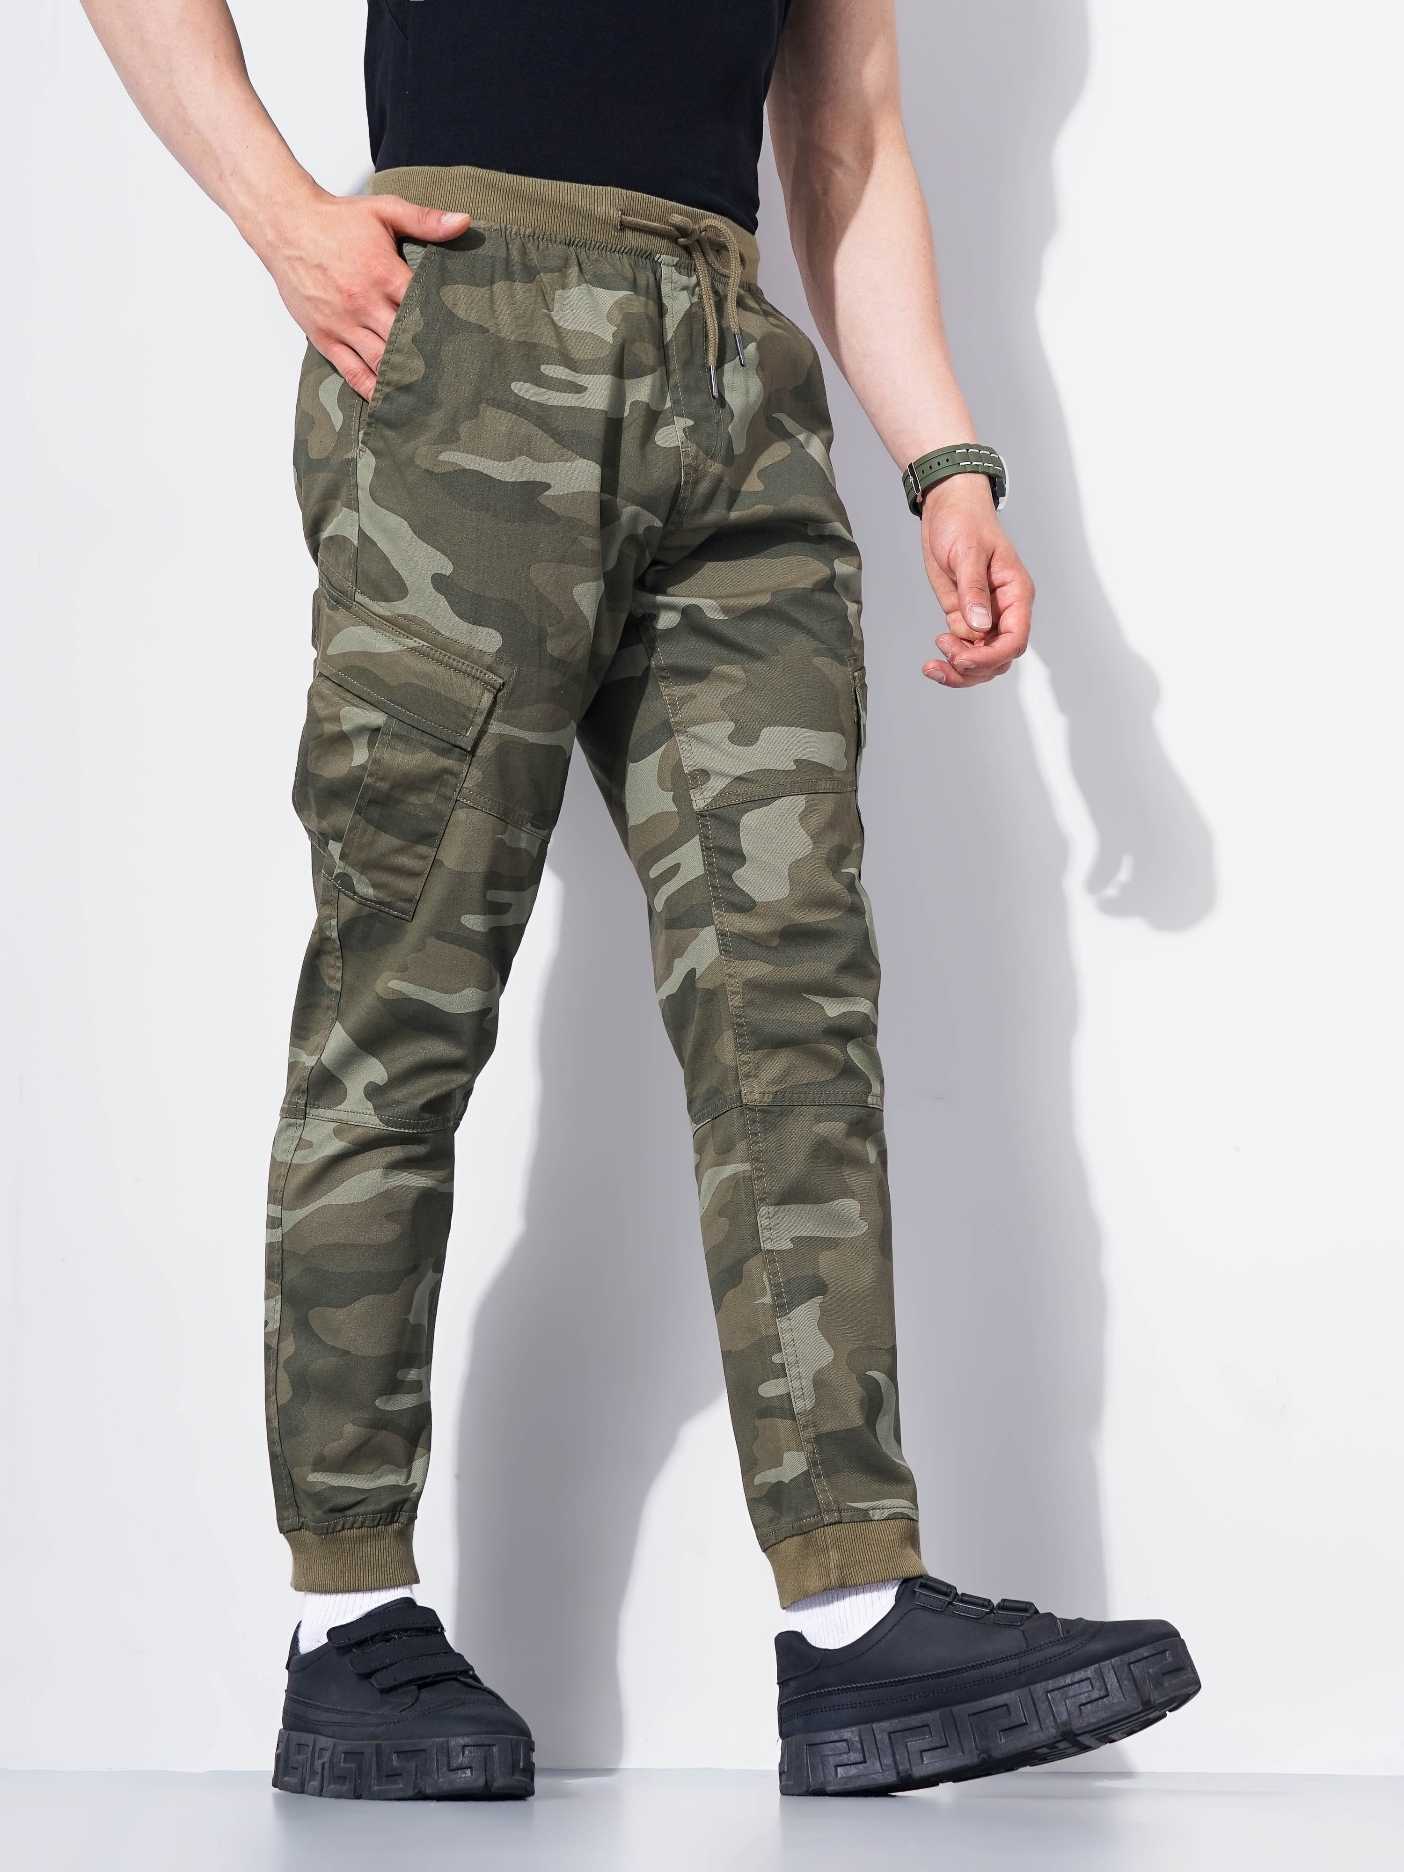 Amazon.com: AKARMY Womens Cargo Pants with Pockets, Outdoor Casual Ripstop  Military Combat Construction Work Pants 2040 ArmyGreen : Sports & Outdoors